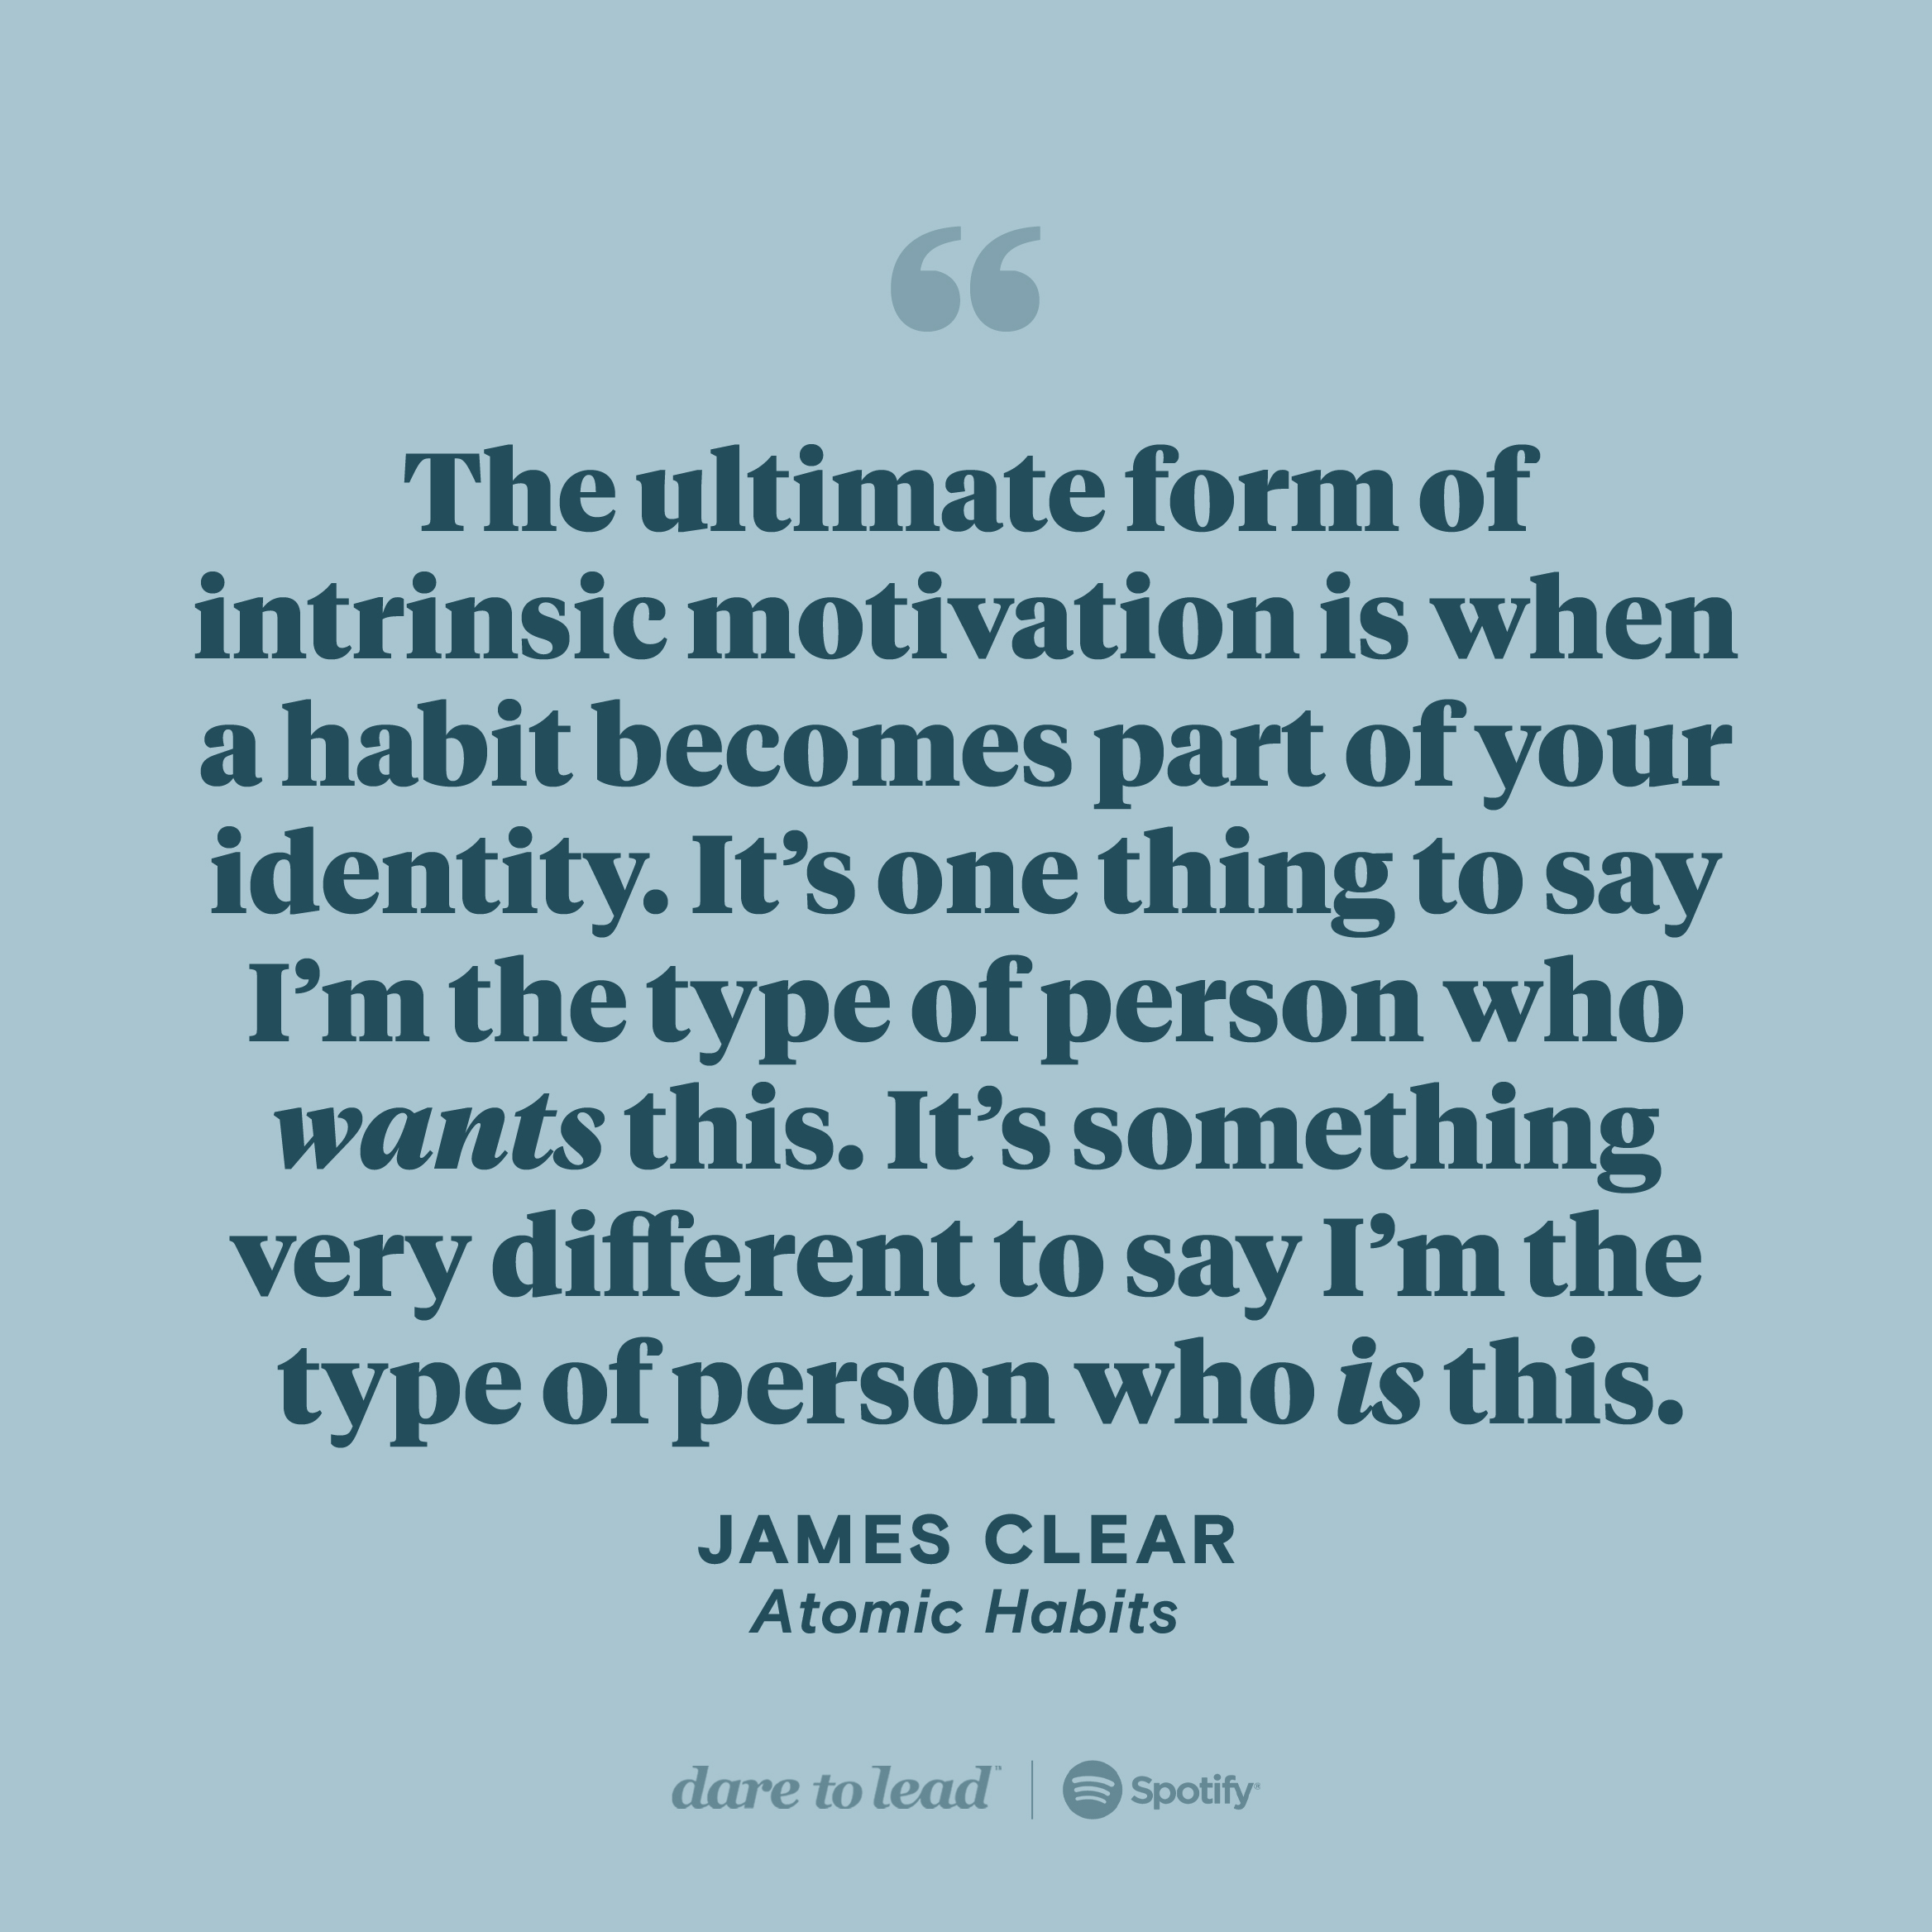 A quote from Atomic Habits, by James Clear: The ultimate form of intrinsic motivation is when a habit becomes part of your identity. It’s one thing to say I’m the type of person who wants this. It’s something very different to say I’m the type of person who is this.